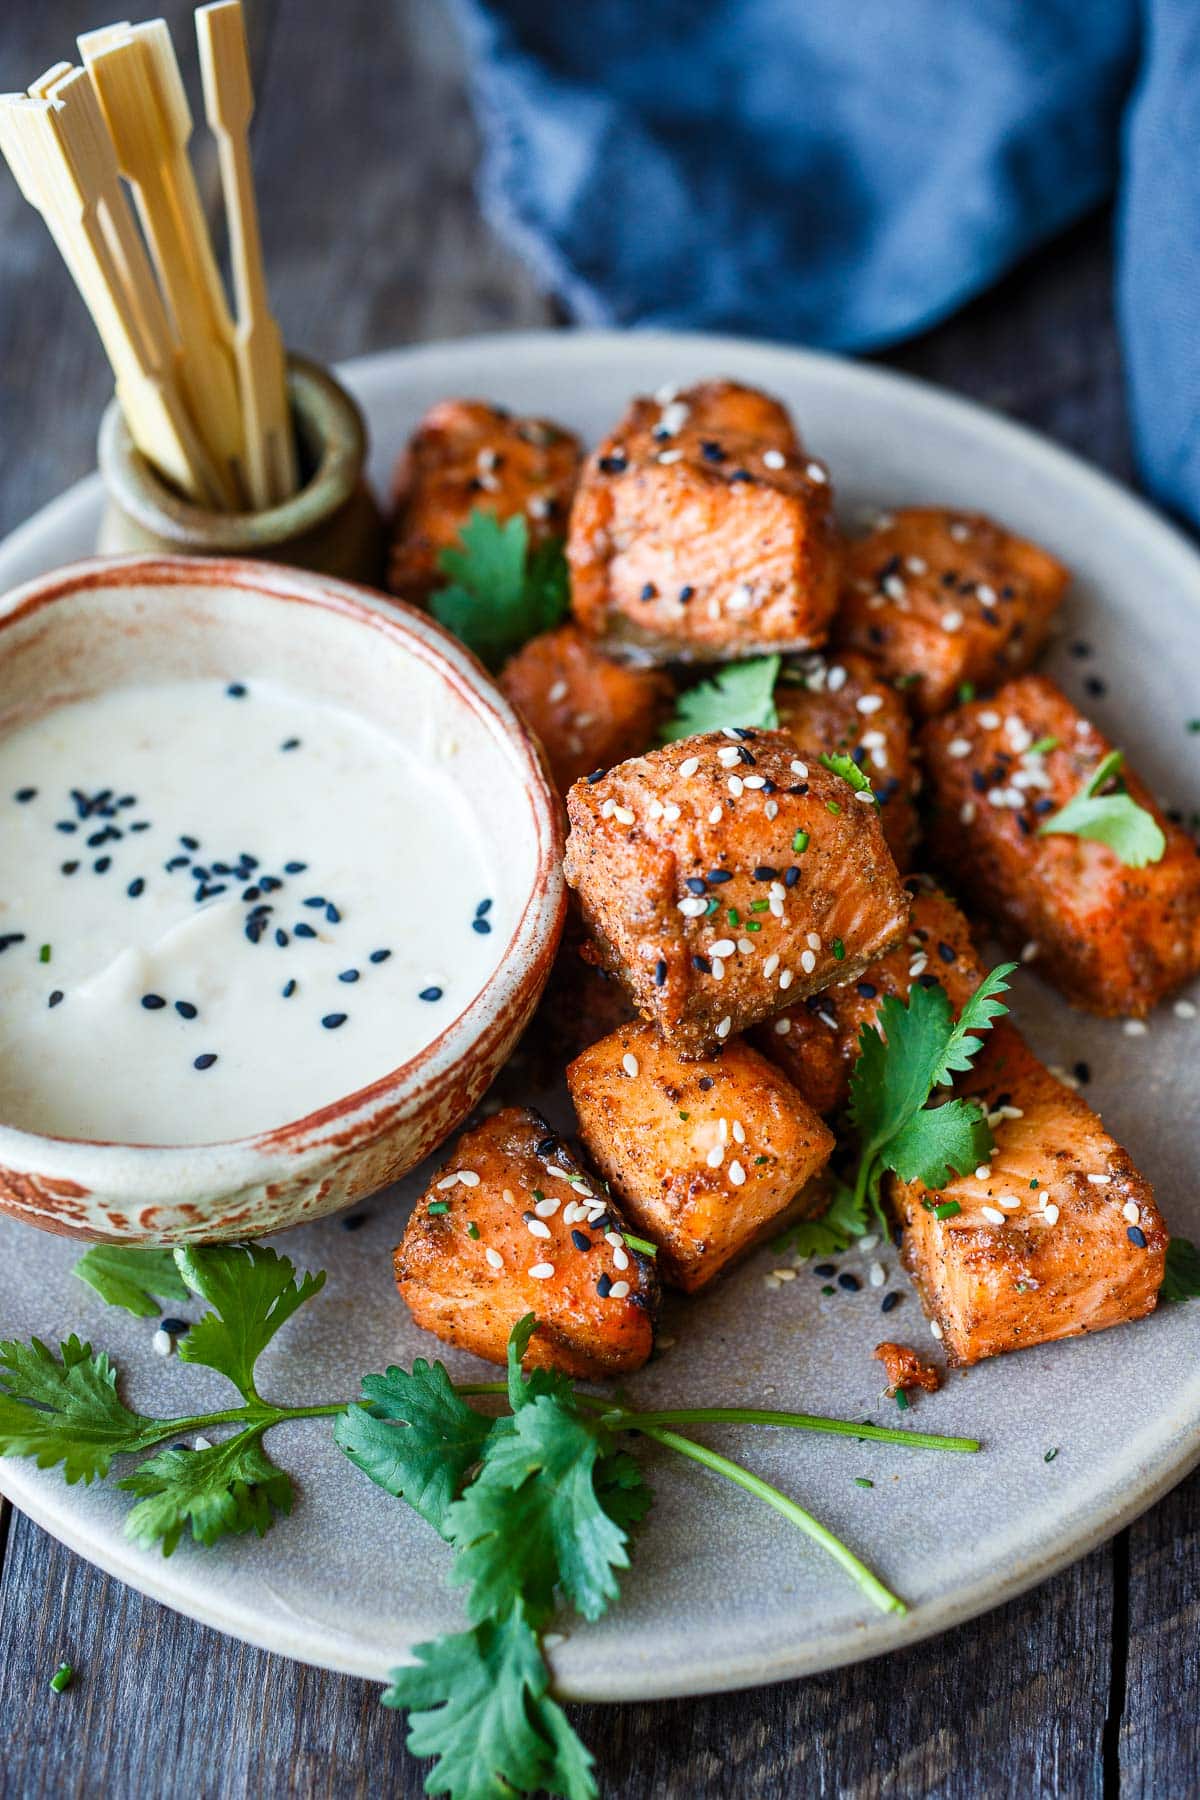 Succulent and flavorful, Air Fryer Salmon Bites are served with a miso ginger dipping sauce and ready in about 15 minutes! Perfect for appetizers, bowls, salads, and snacks! Gluten-free.